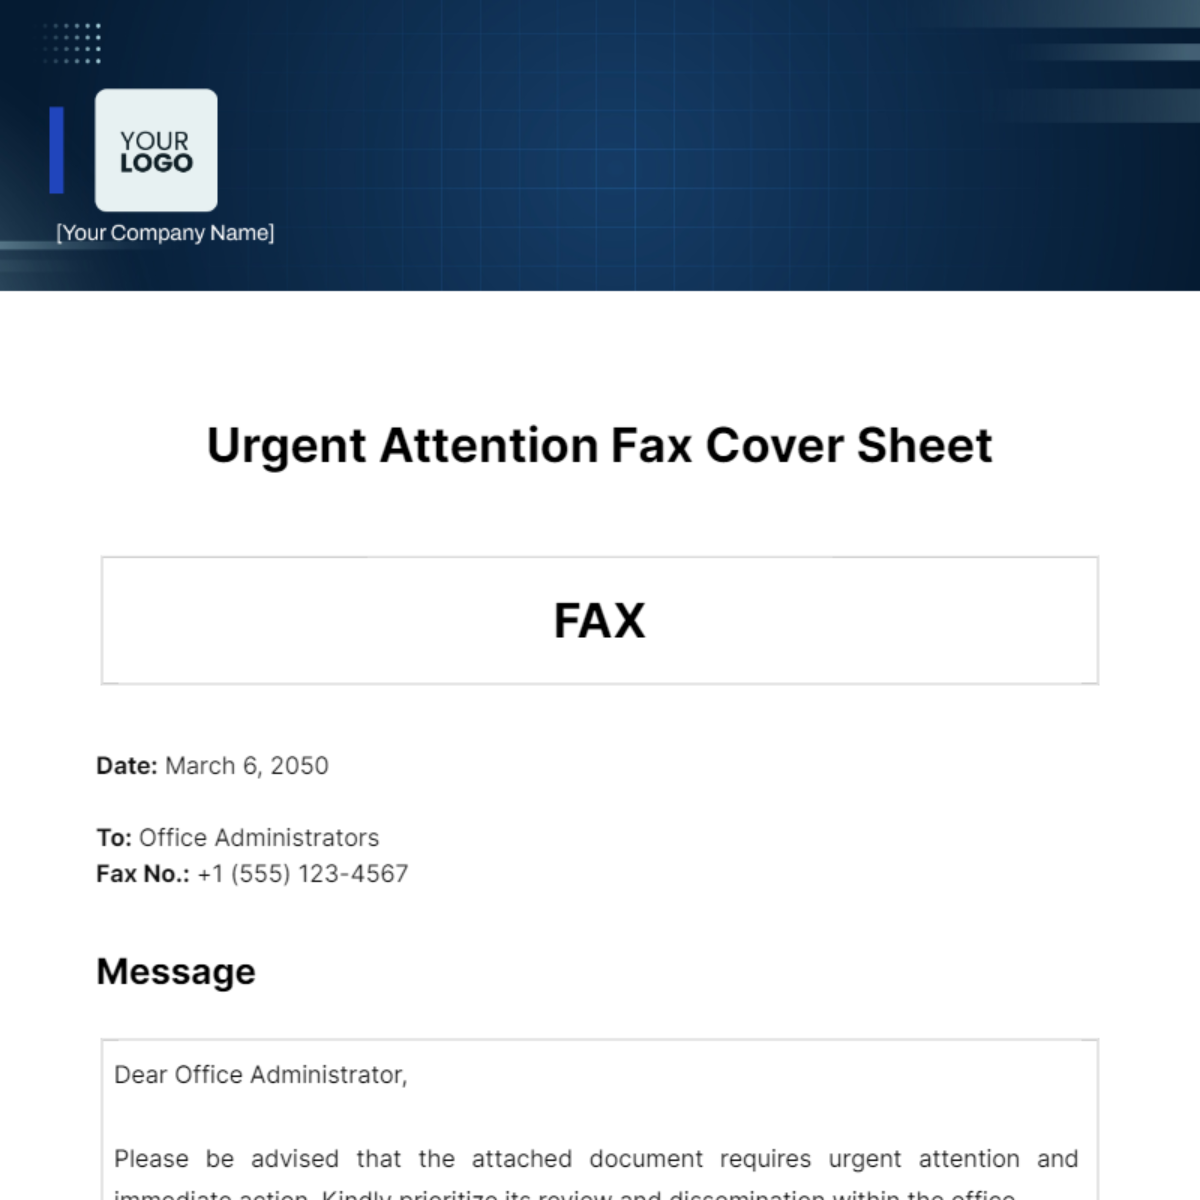 Urgent Attention Fax Cover Sheet